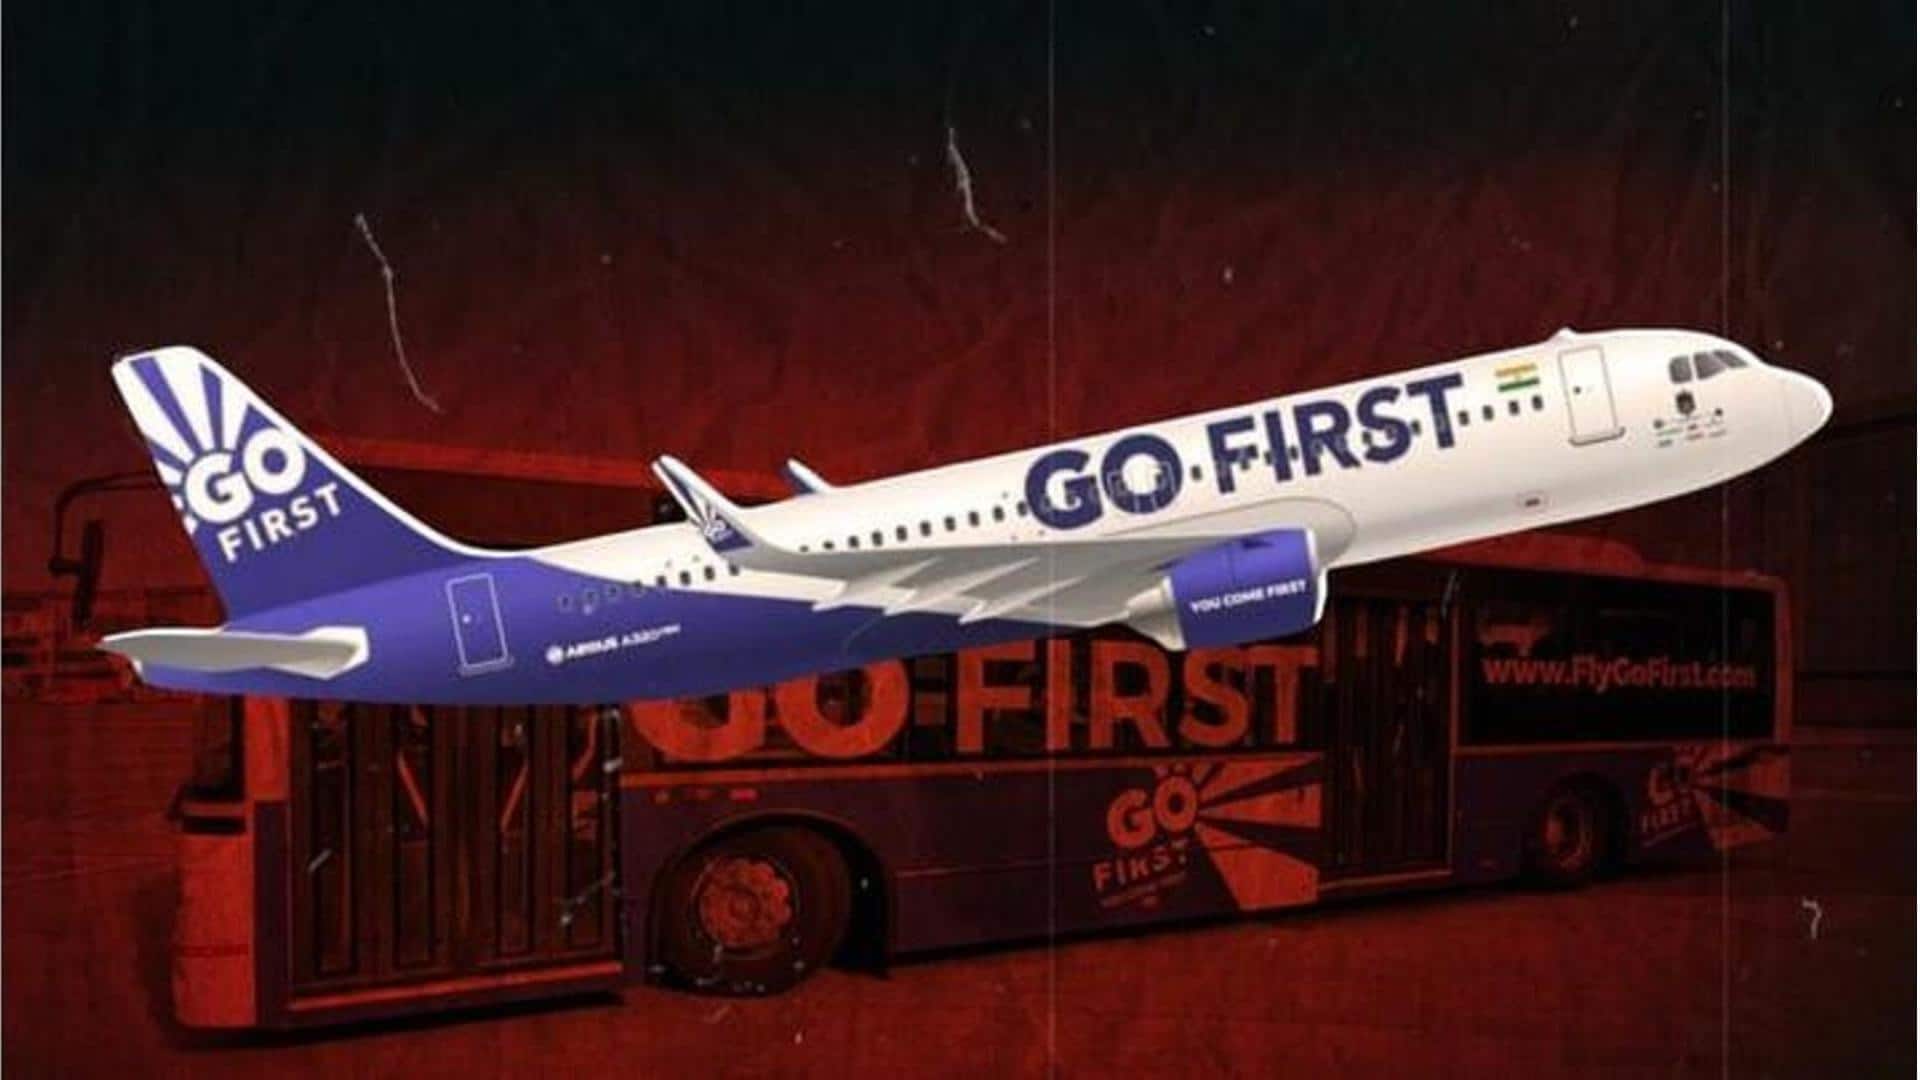 Go First files for insolvency; suspends flights for May 3-5